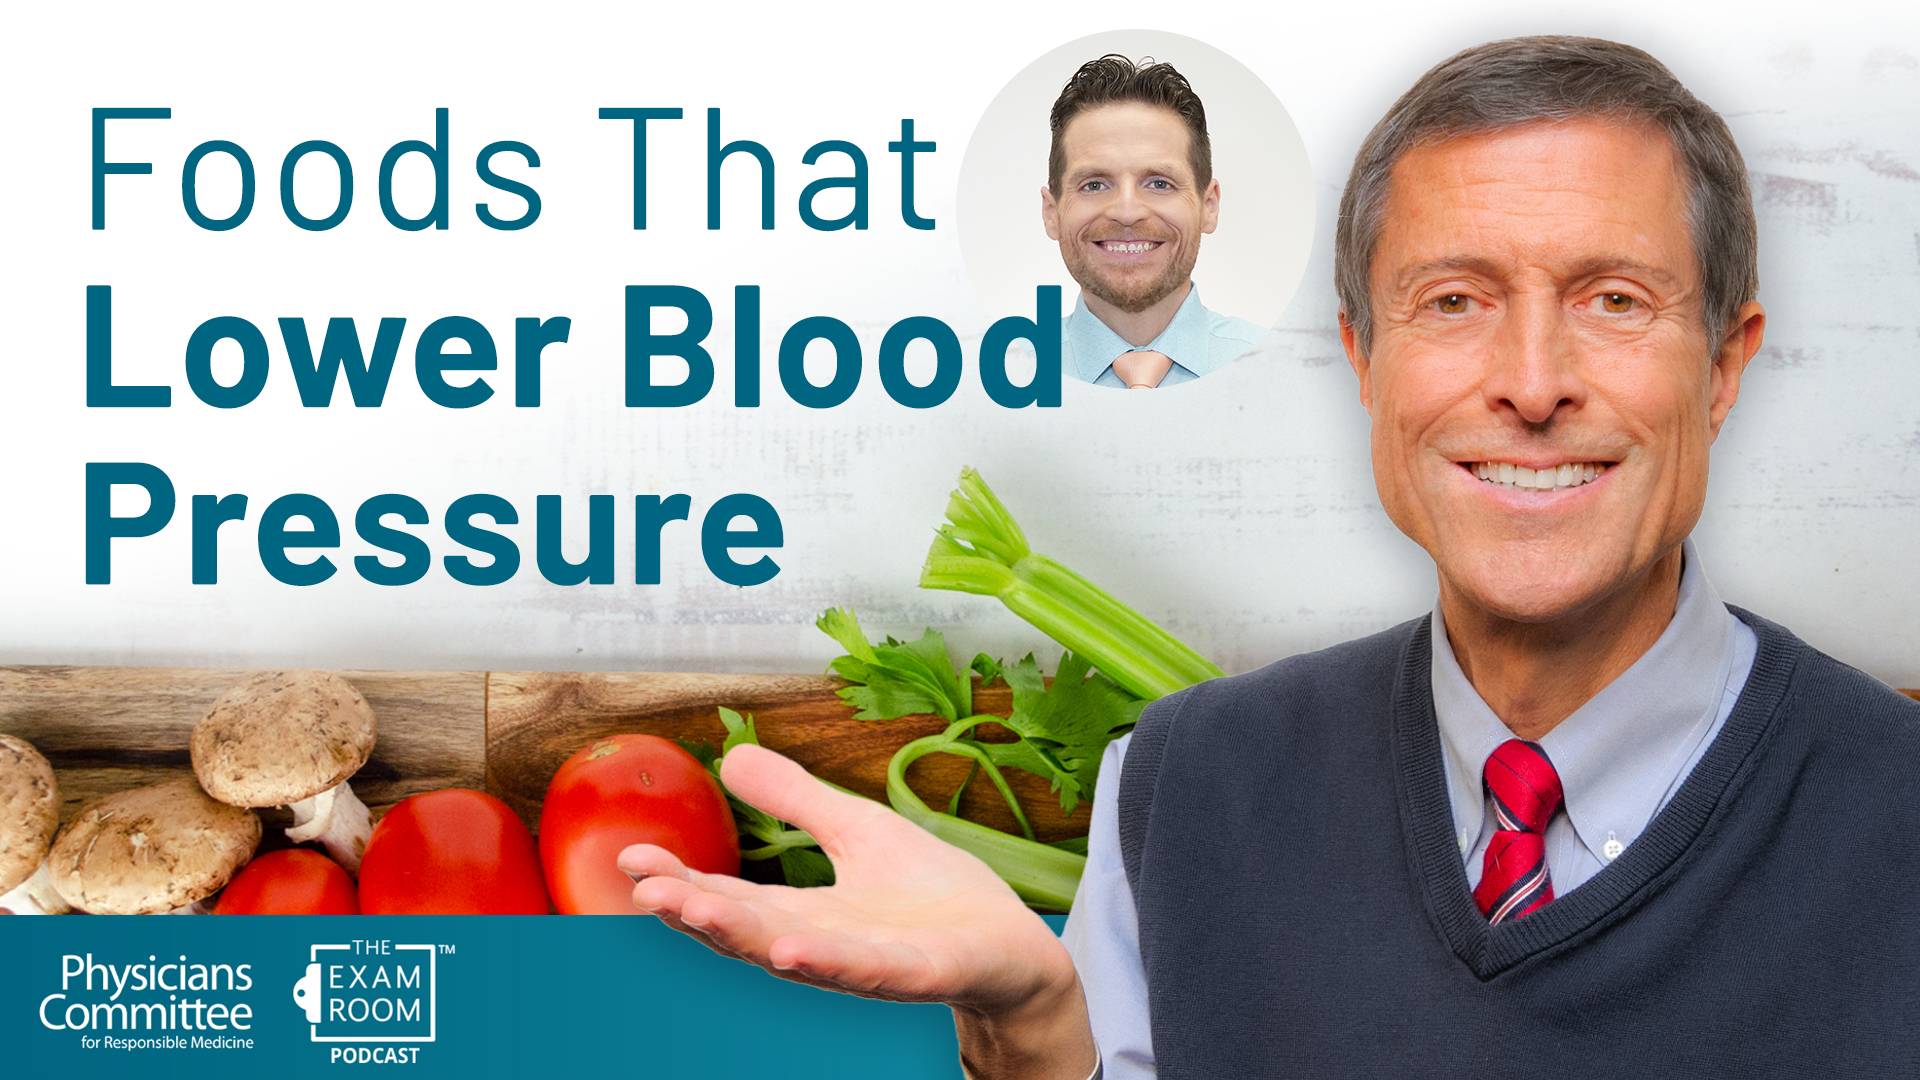 Foods That Lower Blood Pressure Naturally| Dr. Neal Barnard Live Q&A